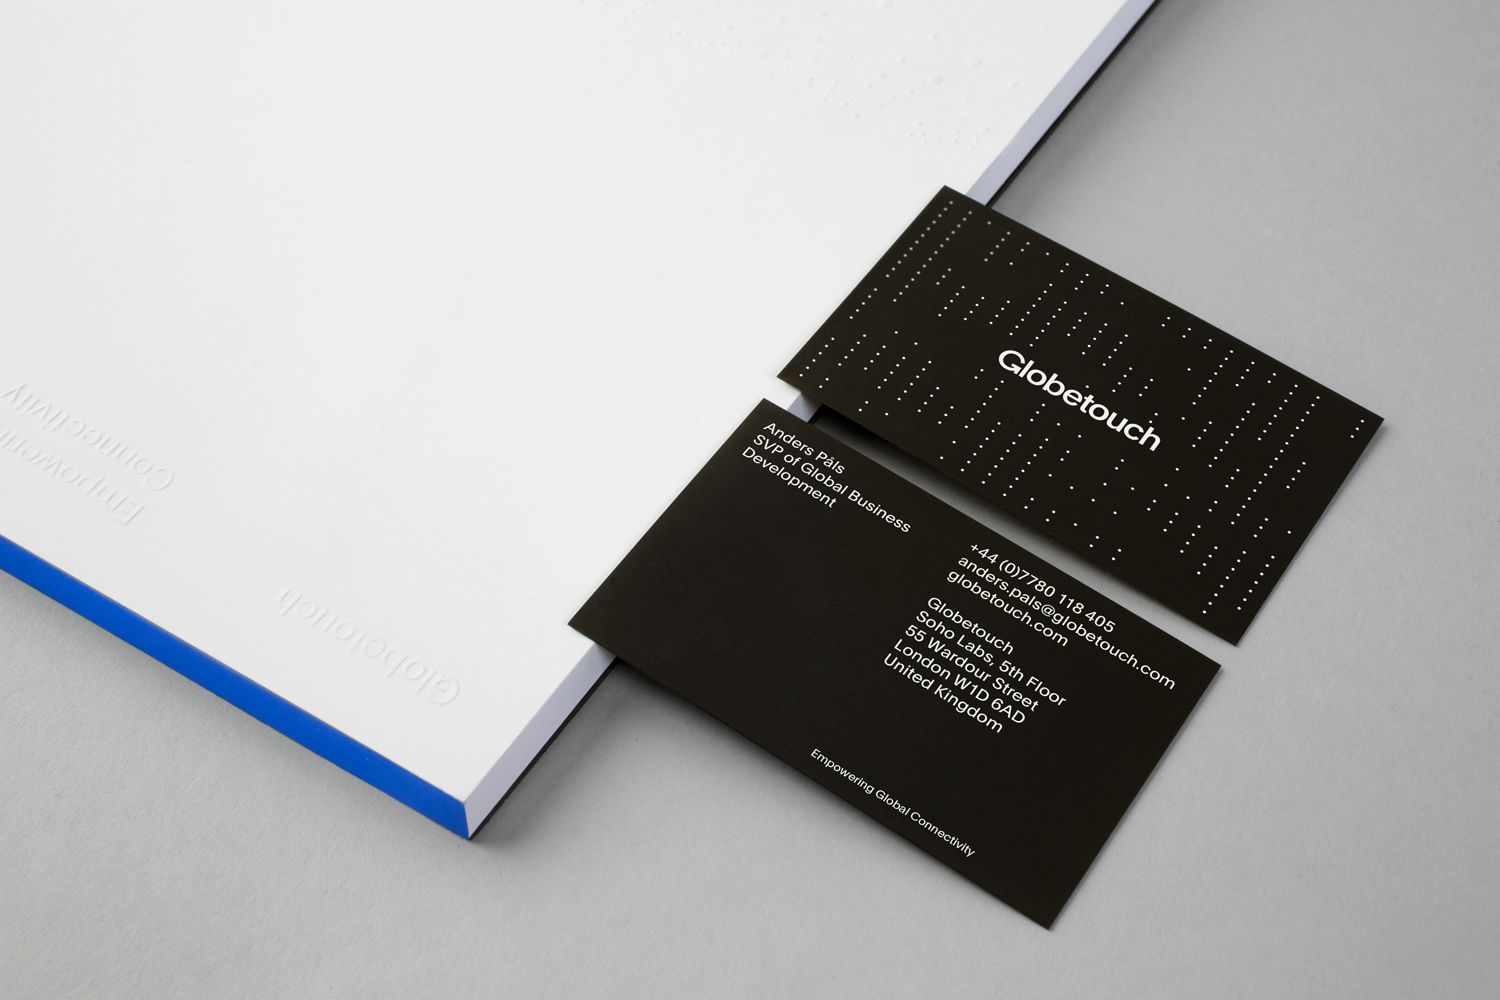 Brand identity and business cards for global mobile communications platform Globetouch by graphic designs studio Bunch